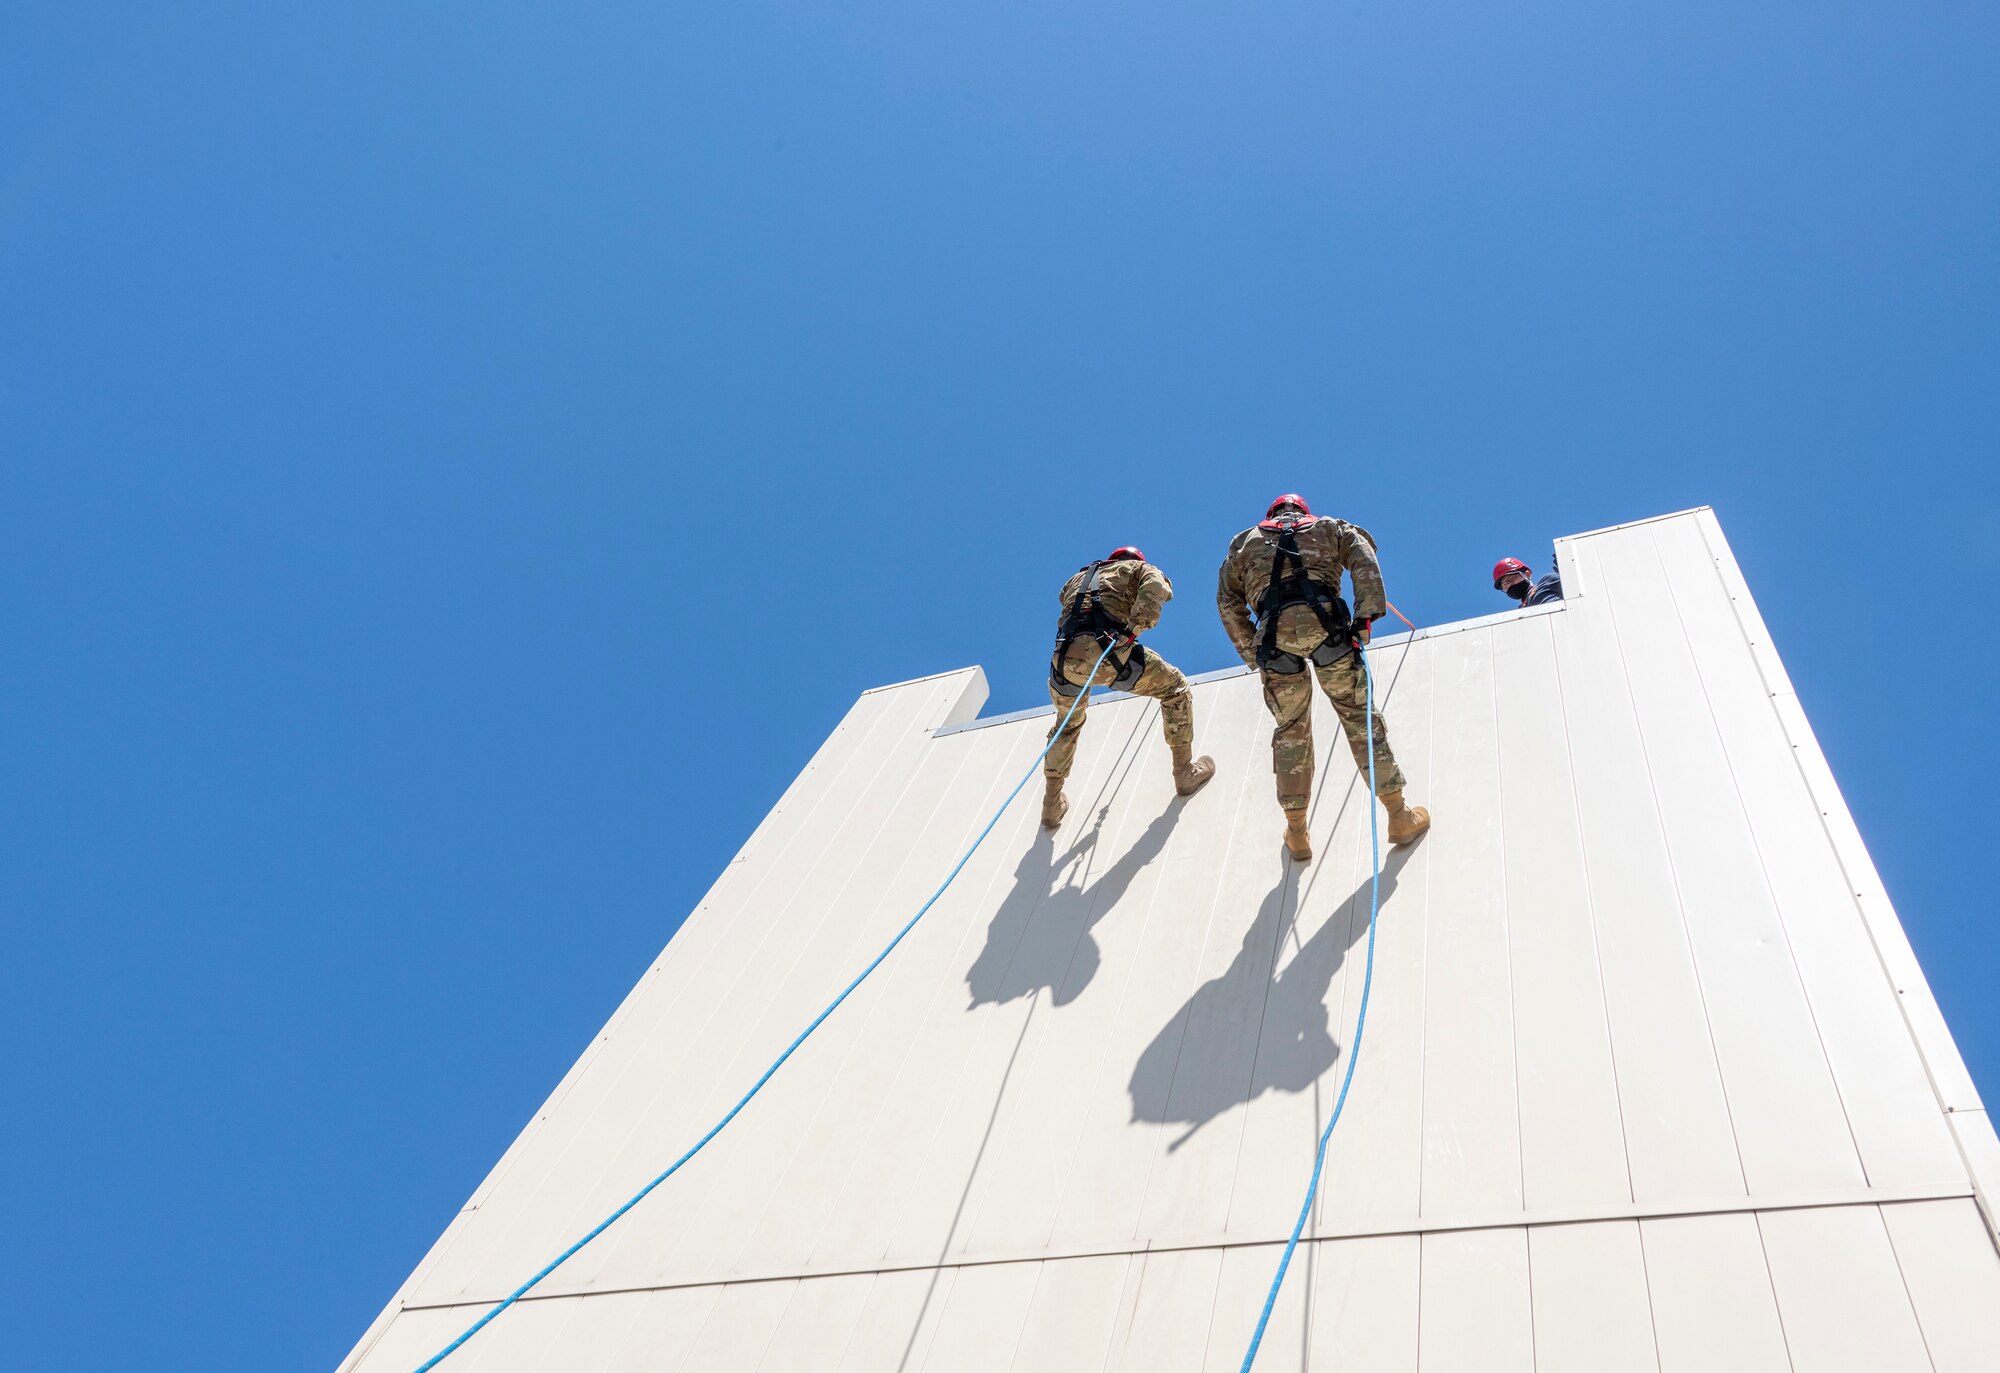 U.S. Air Force Staff. Sgt. Daniel Robinson, left, 60th Civil Engineer Squadron lead firefighter, and Major David Schoenhardt, 60th Civil Engineer Squadron Operations commander, rappel down a structure April 19, 2021, at the Travis Fire and Emergency Services training facility at Travis Air Force Base, California. The training demonstration provided senior leadership with a clear picture of the technical rescue capabilities for multi-story building and confined space rescues conducted by Travis AFB emergency response personnel. (U.S. Air Force photo by Heide Couch)